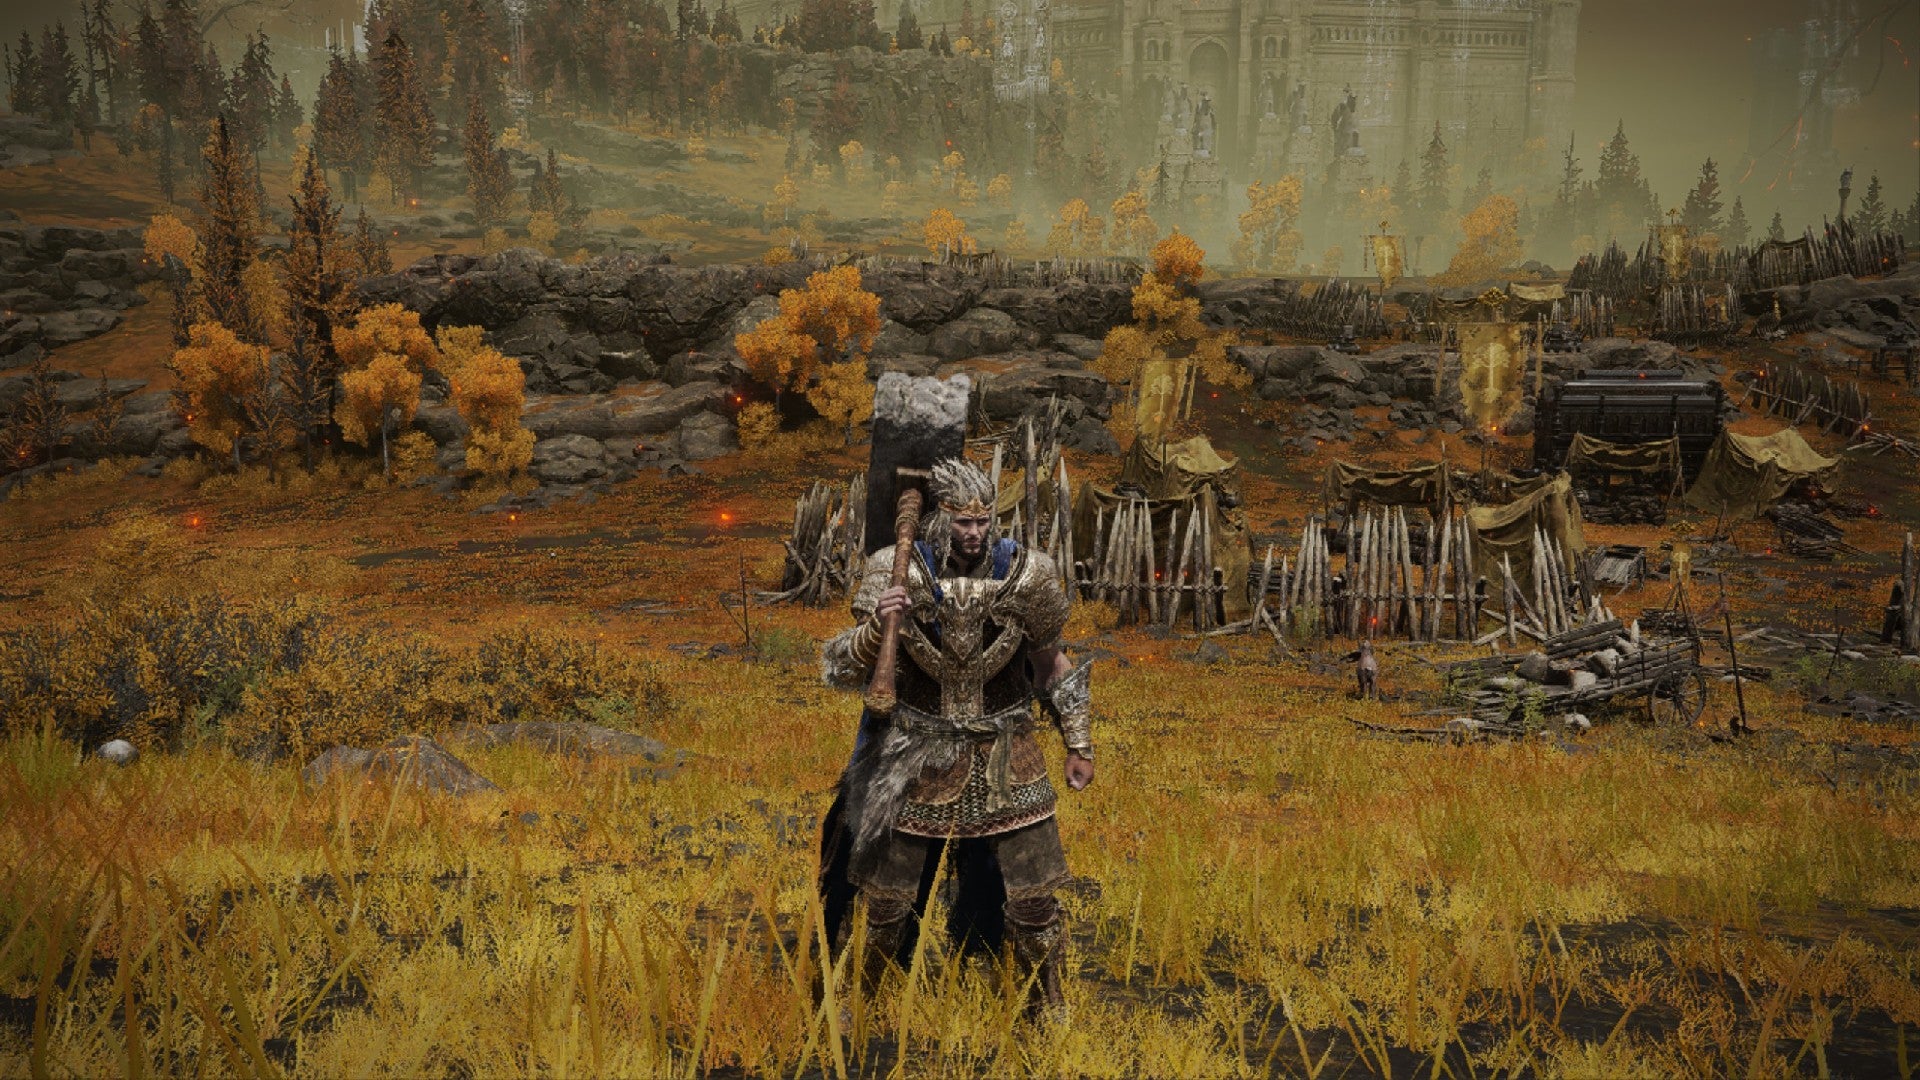 Elden Ring player standing on an Autumnal field wearing warrior clothing and wielding a large Brick Hammer weapon